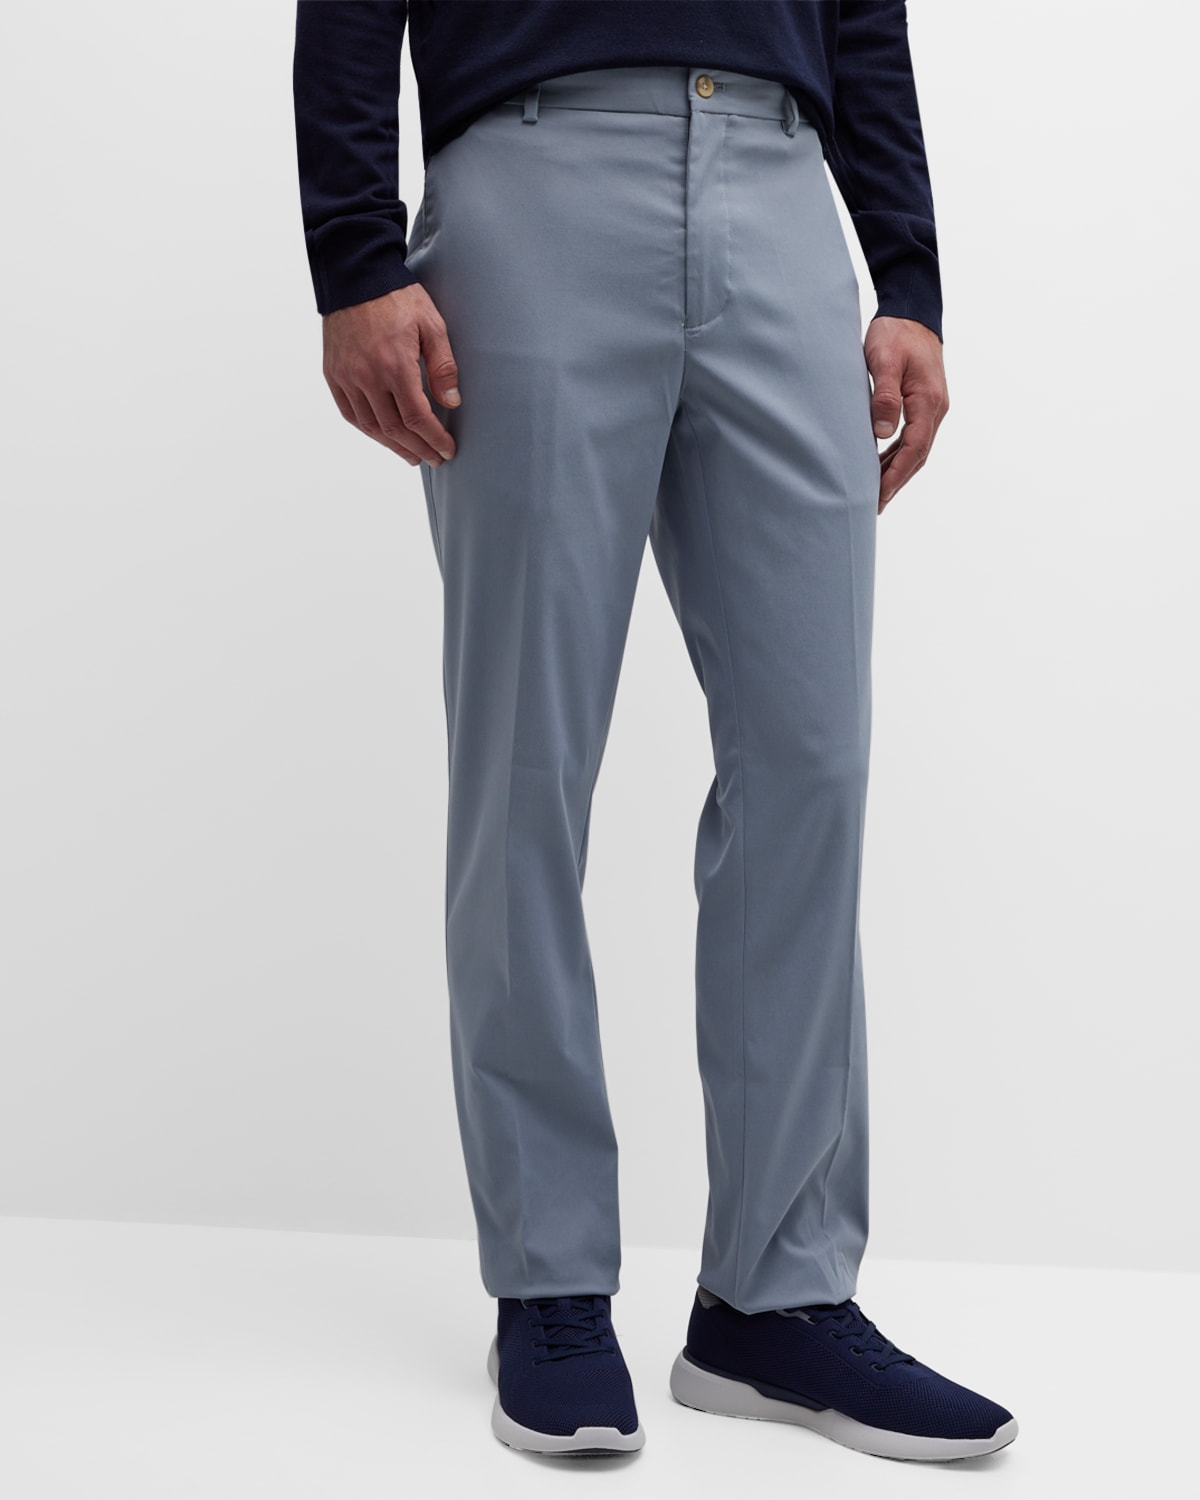 Men's Raleigh Performance Trousers